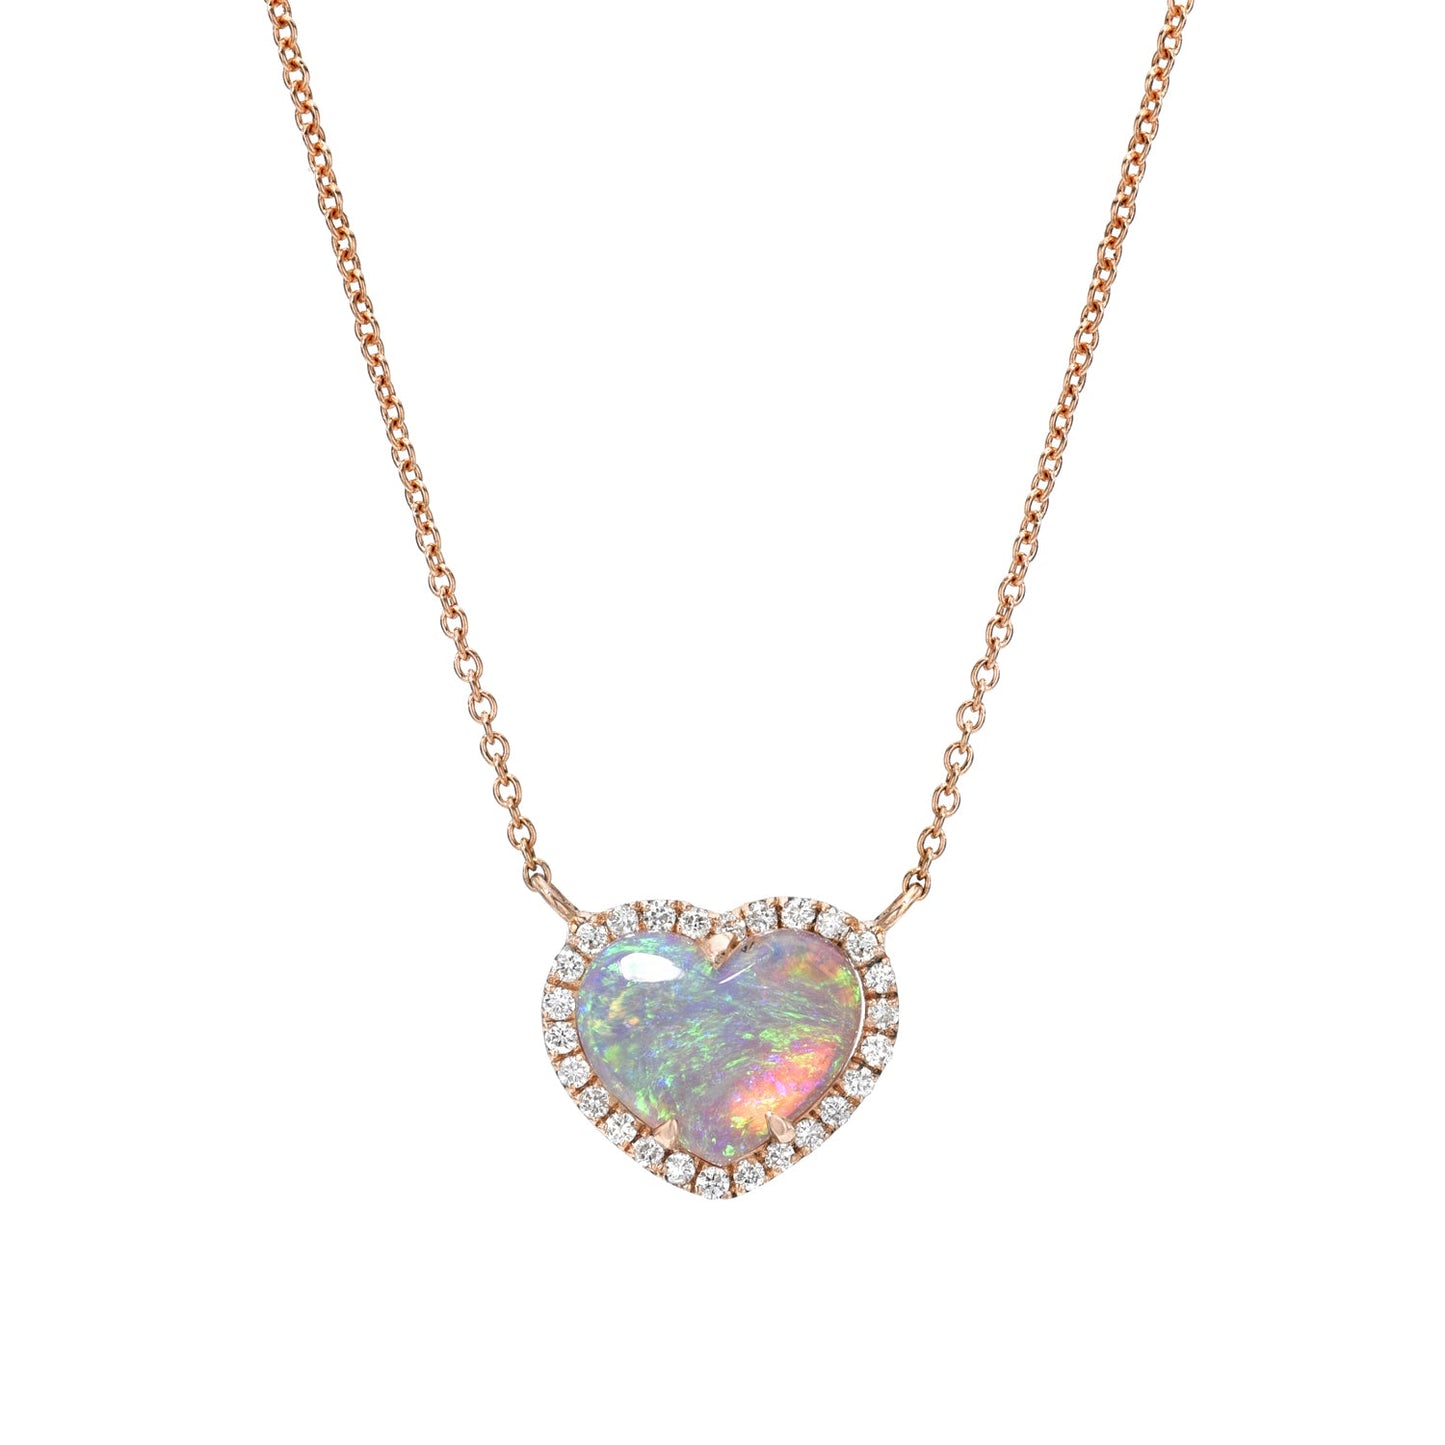 An Opal Heart Necklace by NIXIN Jewelry hanging in front of a white backdrop. The necklace is made with a Crystal Opal and diamonds in 14k rose gold.